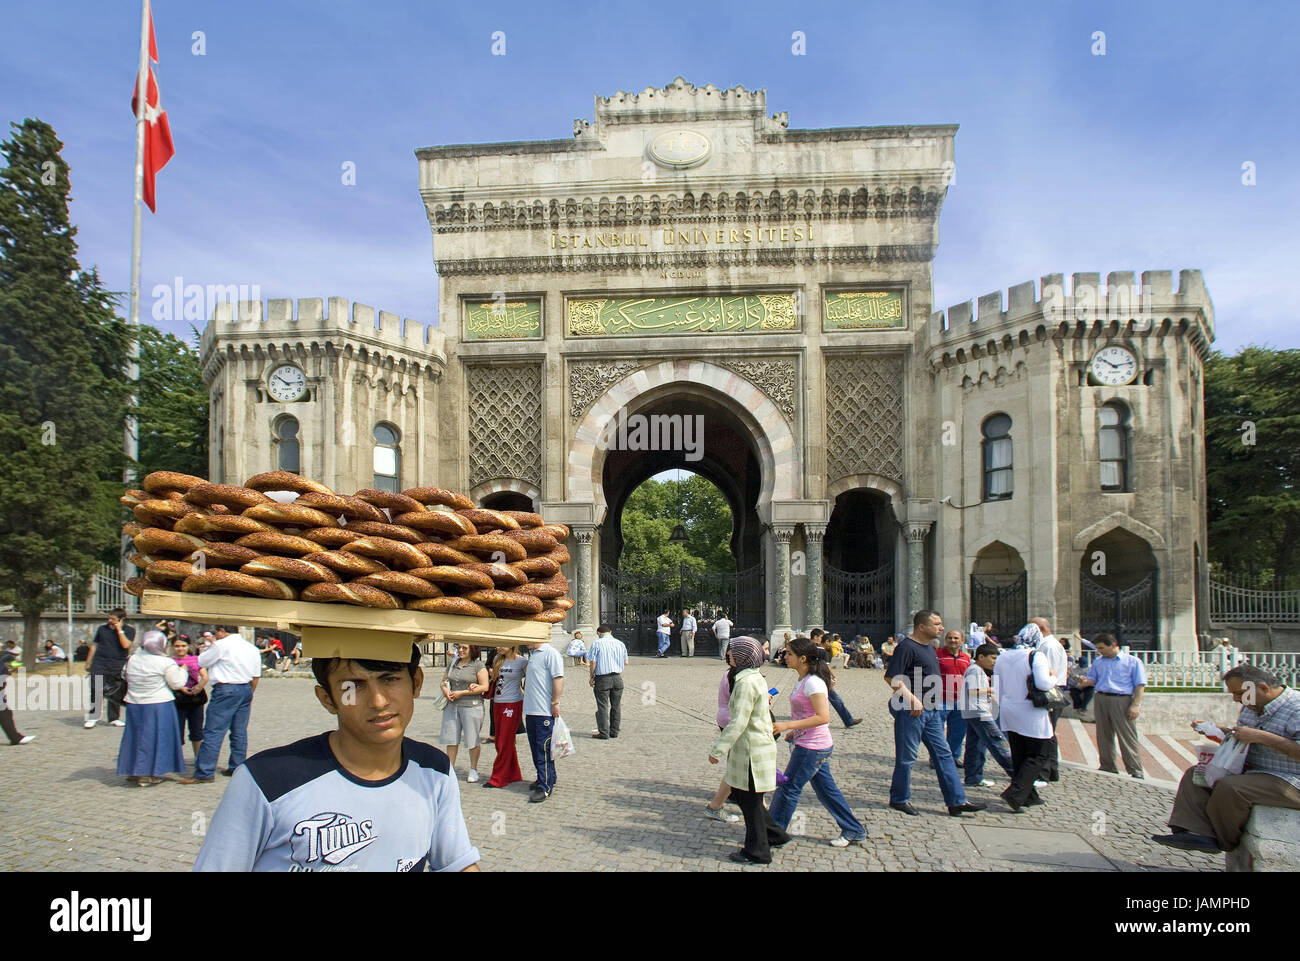 Turkey,Istanbul,university,seller,tablet,cake,sell,no model release,town,city,destination,place of interest,building,structure,architecture,input,gate,goal building,person,tourist,passer-by,man,young,dealer,food,outside, Stock Photo